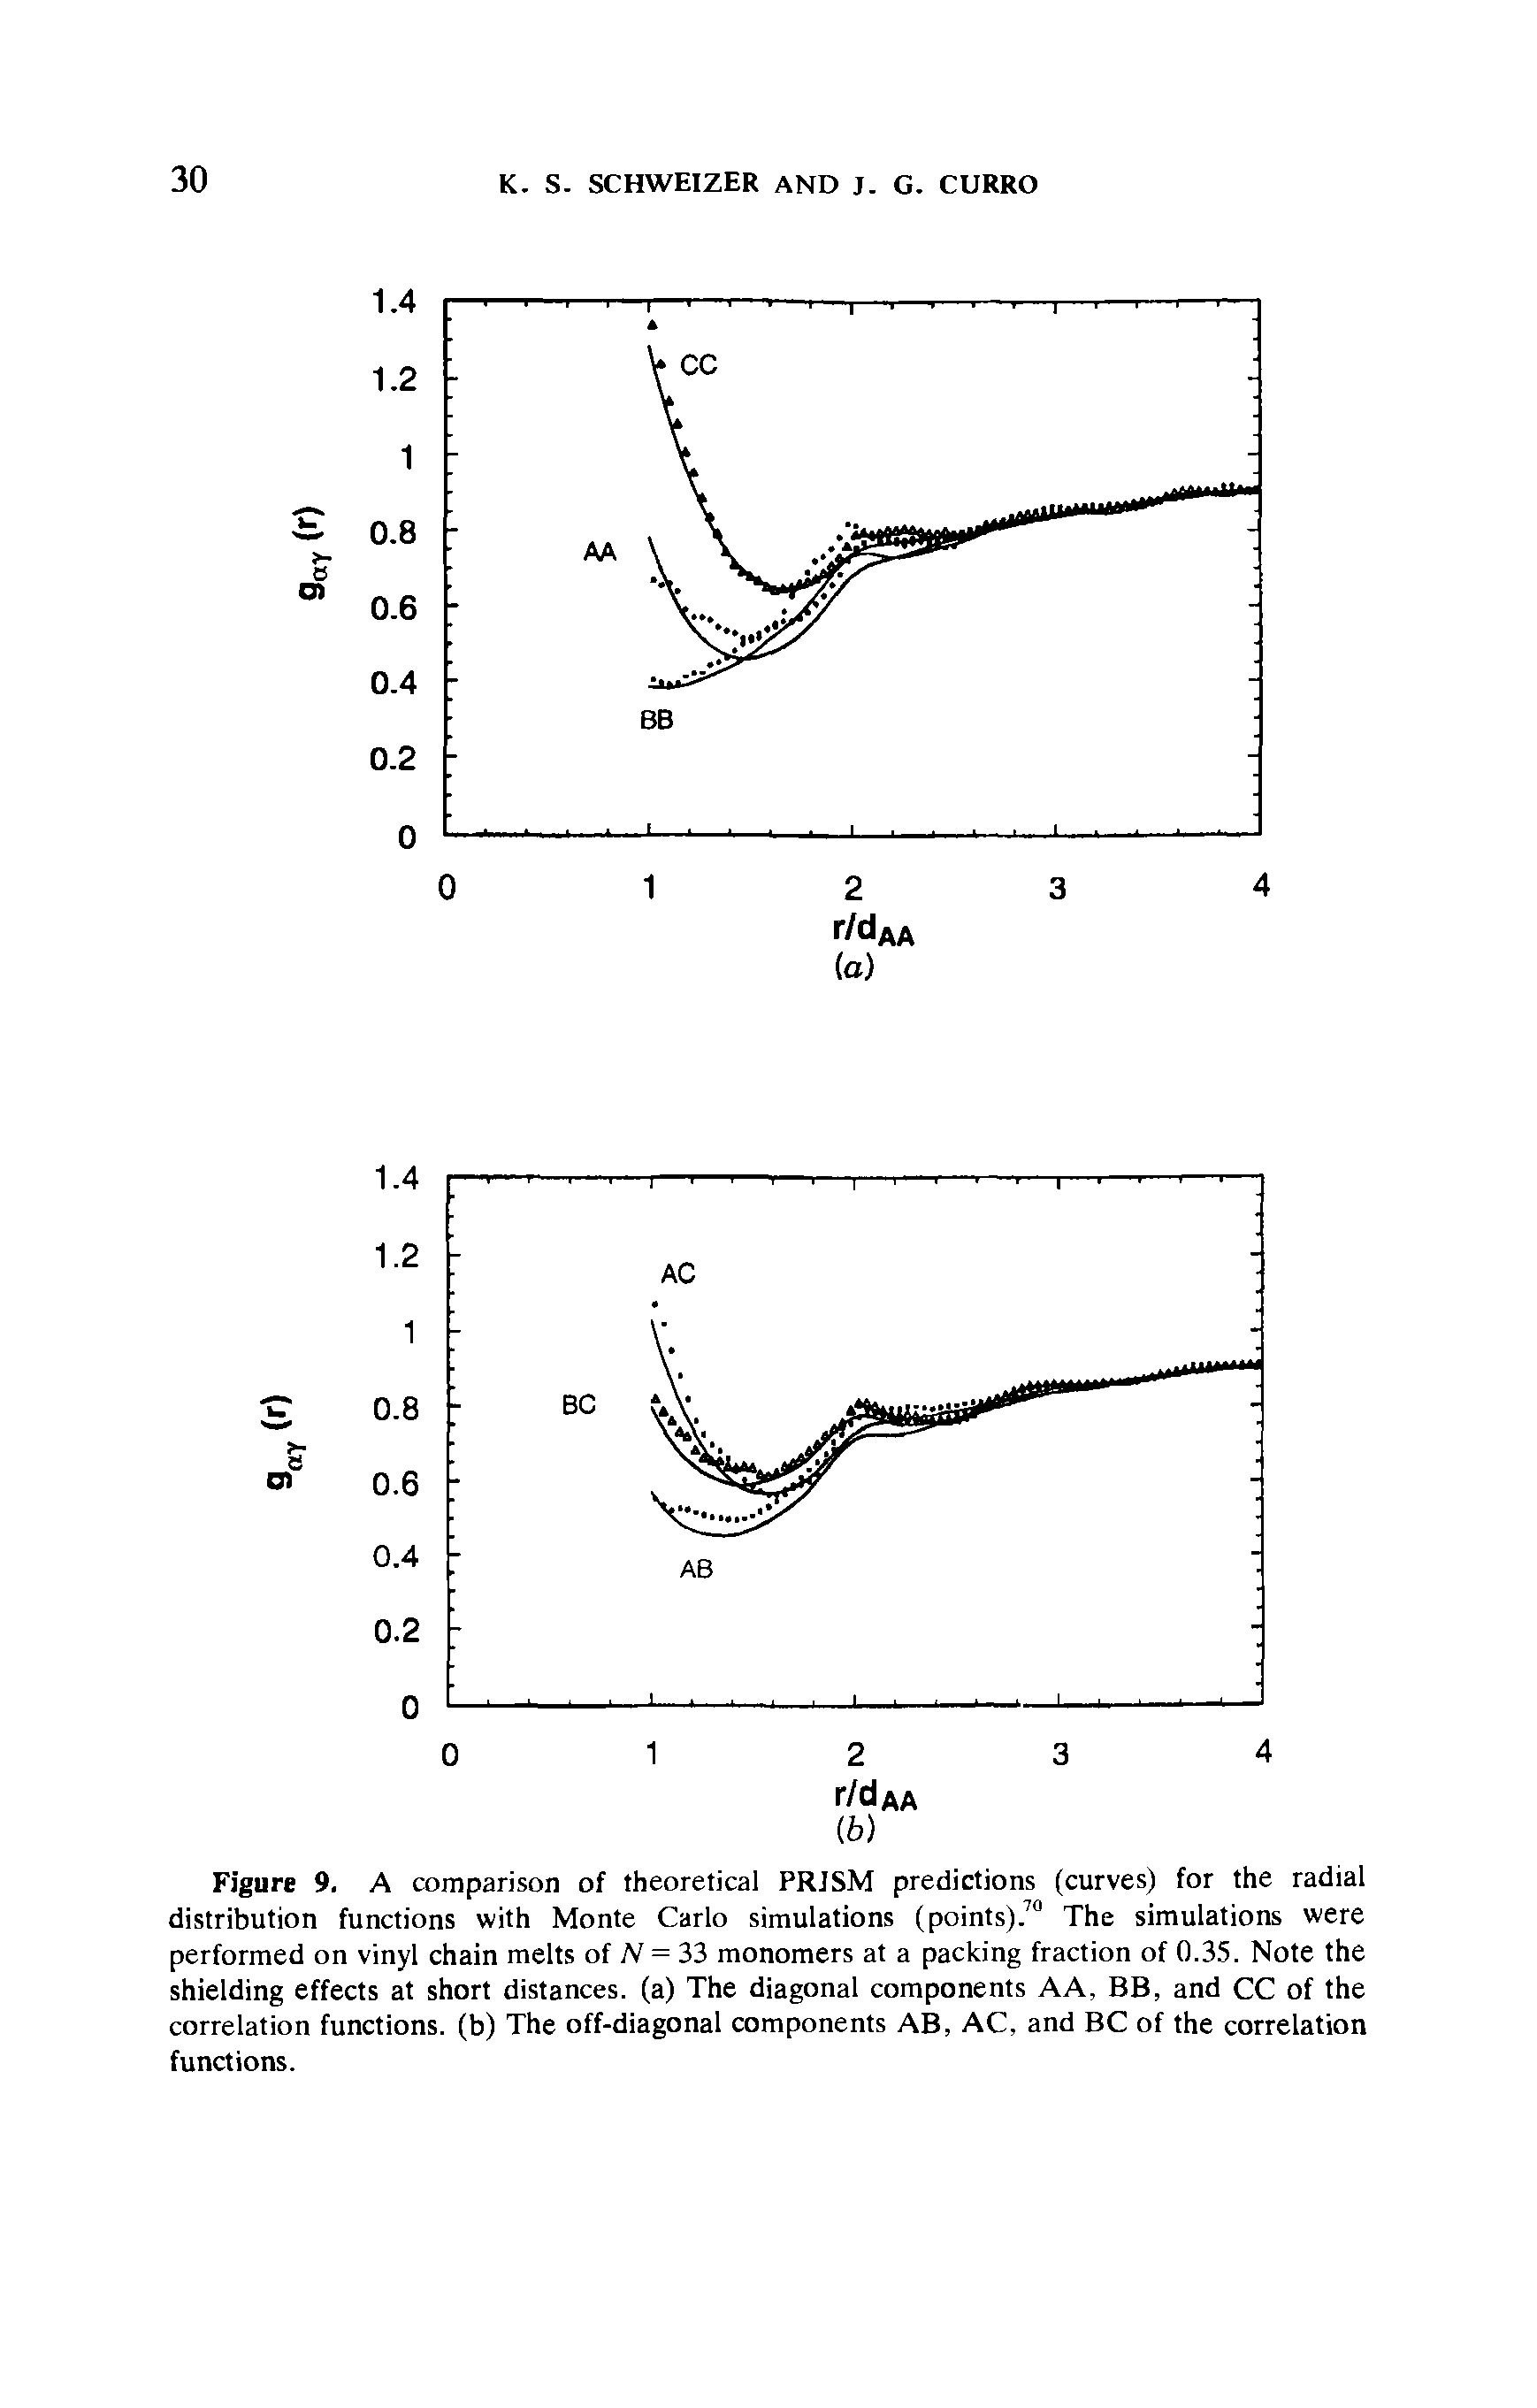 Figure 9. A comparison of theoretical PRJSM predictions (curves) for the radial distribution functions with Monte Carlo simulations (points). The simulations were performed on vinyl chain melts of TV = 33 monomers at a packing fraction of 0.35. Note the shielding effects at short distances, (a) The diagonal components AA, BB, and CC of the correlation functions, (b) The off-diagonal components AB, AC, and BC of the correlation functions.